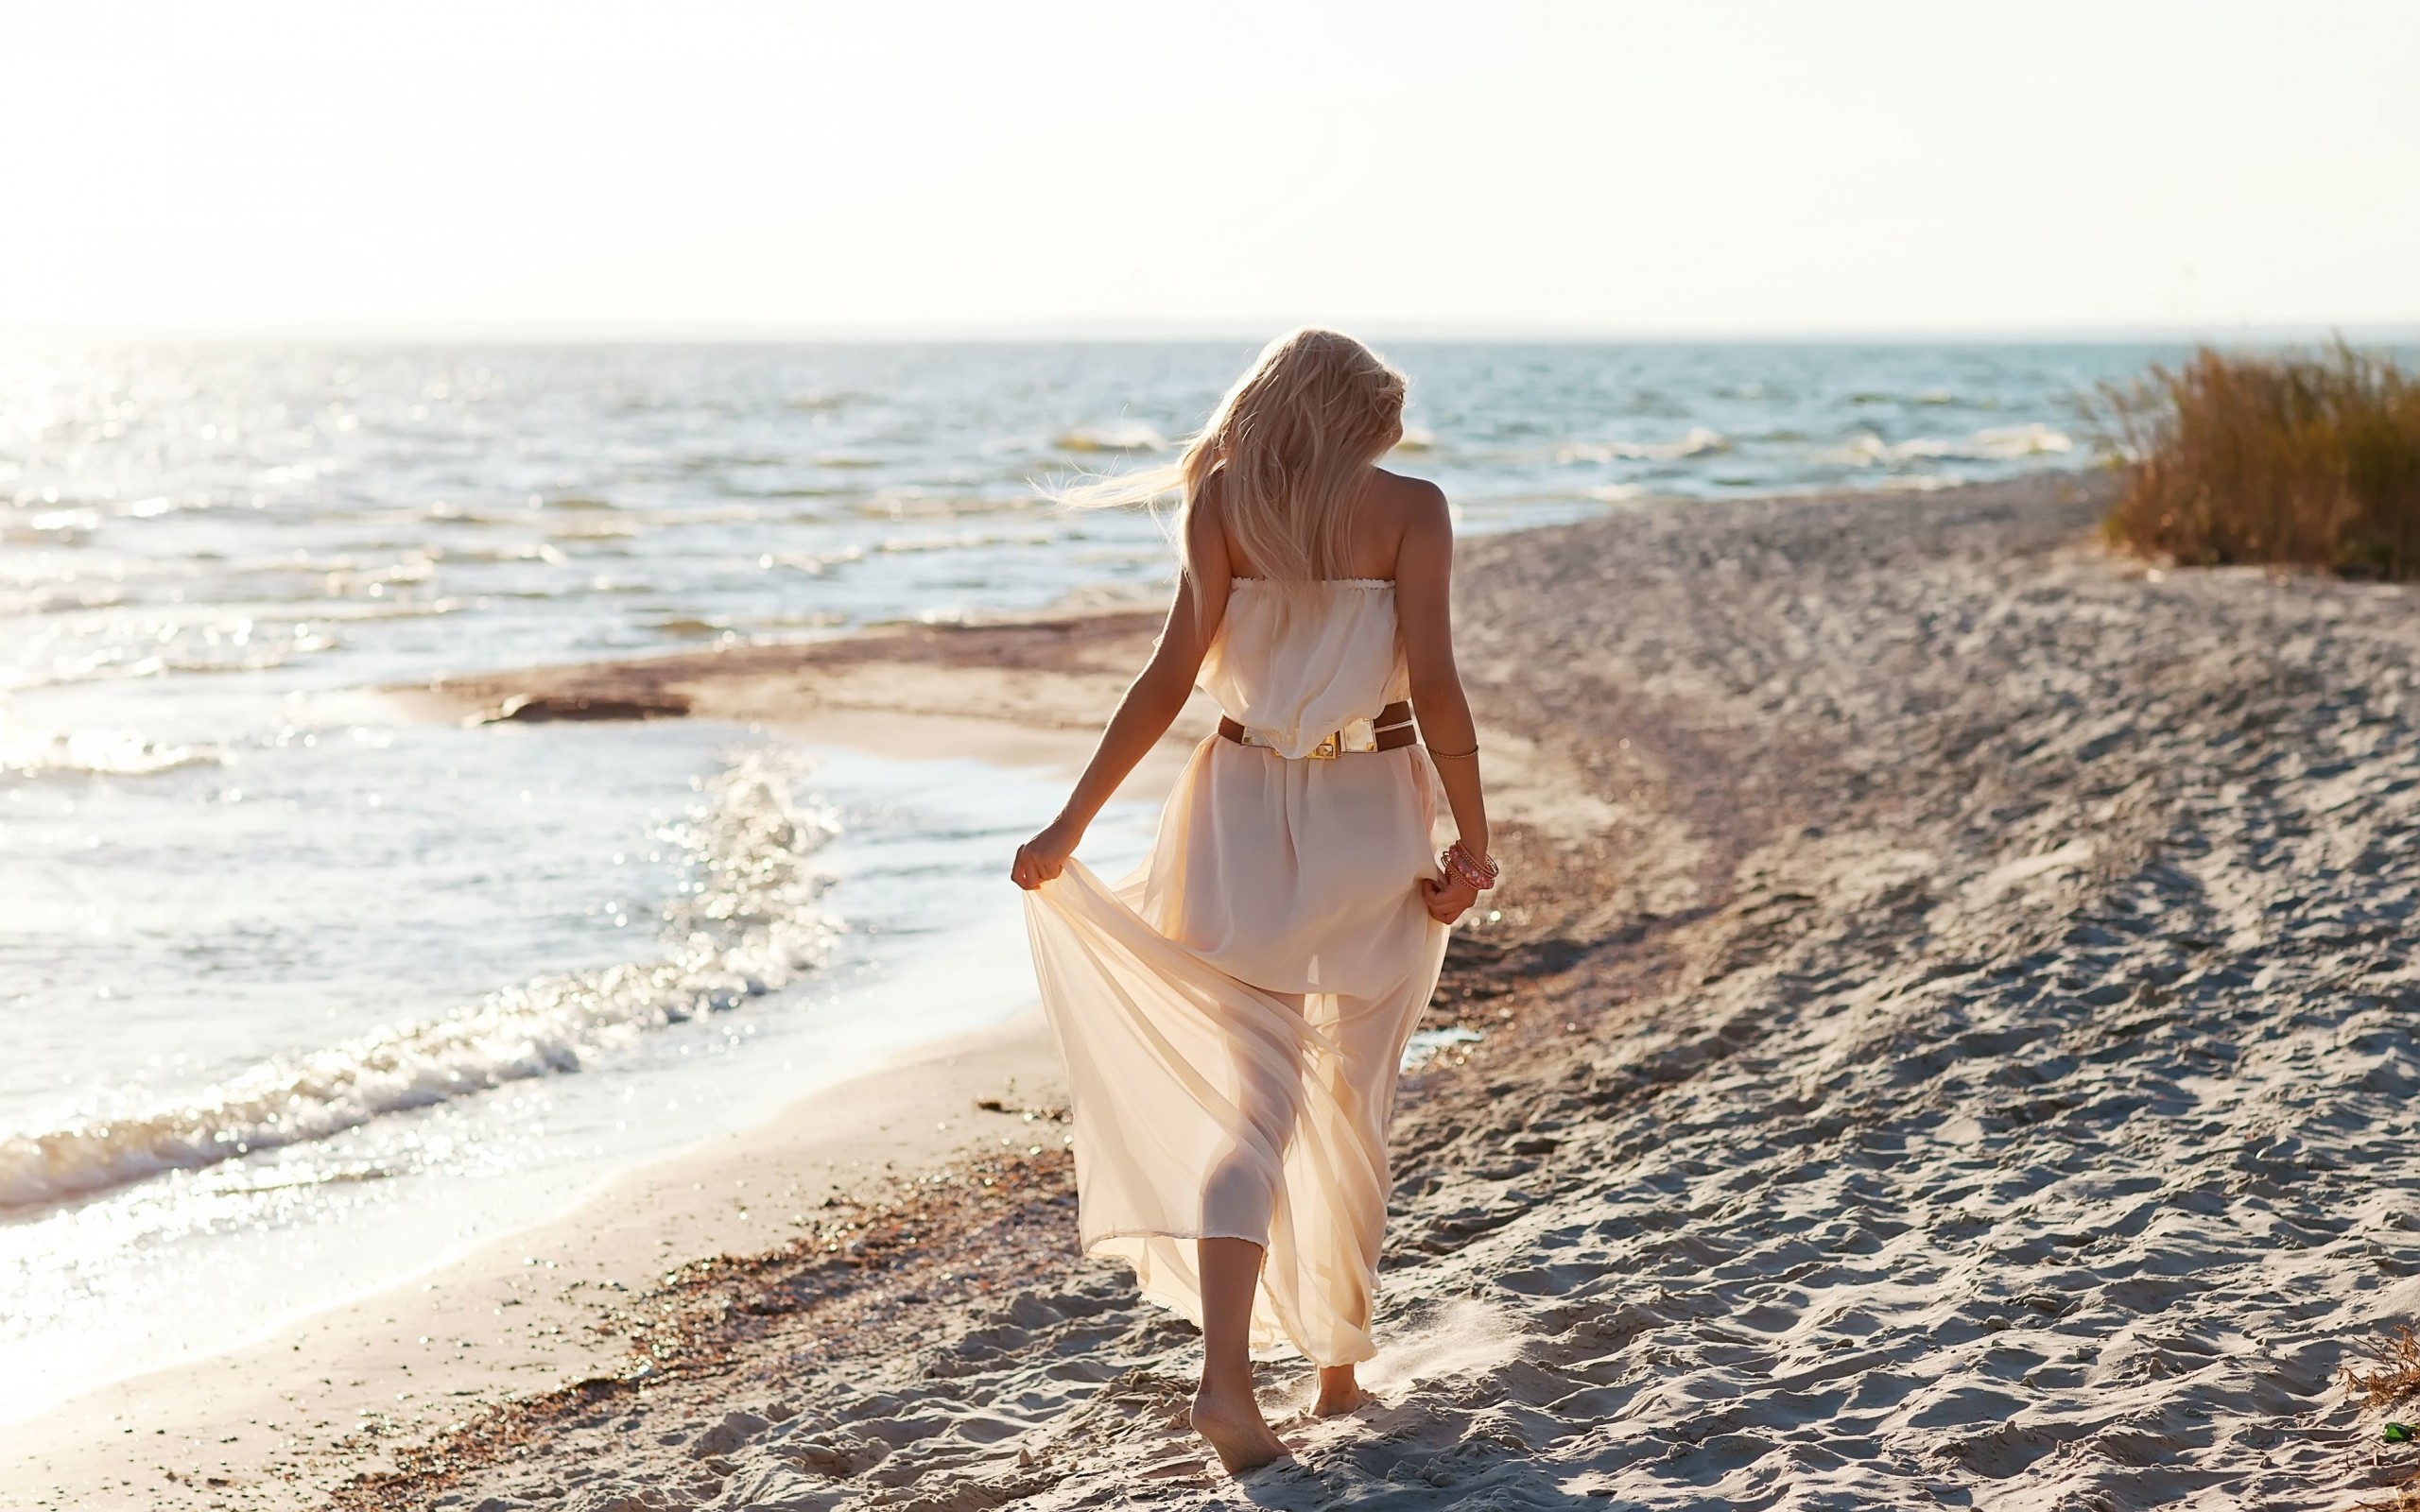 blondes, women, sand, models, white dress, sea, see-though dress ...